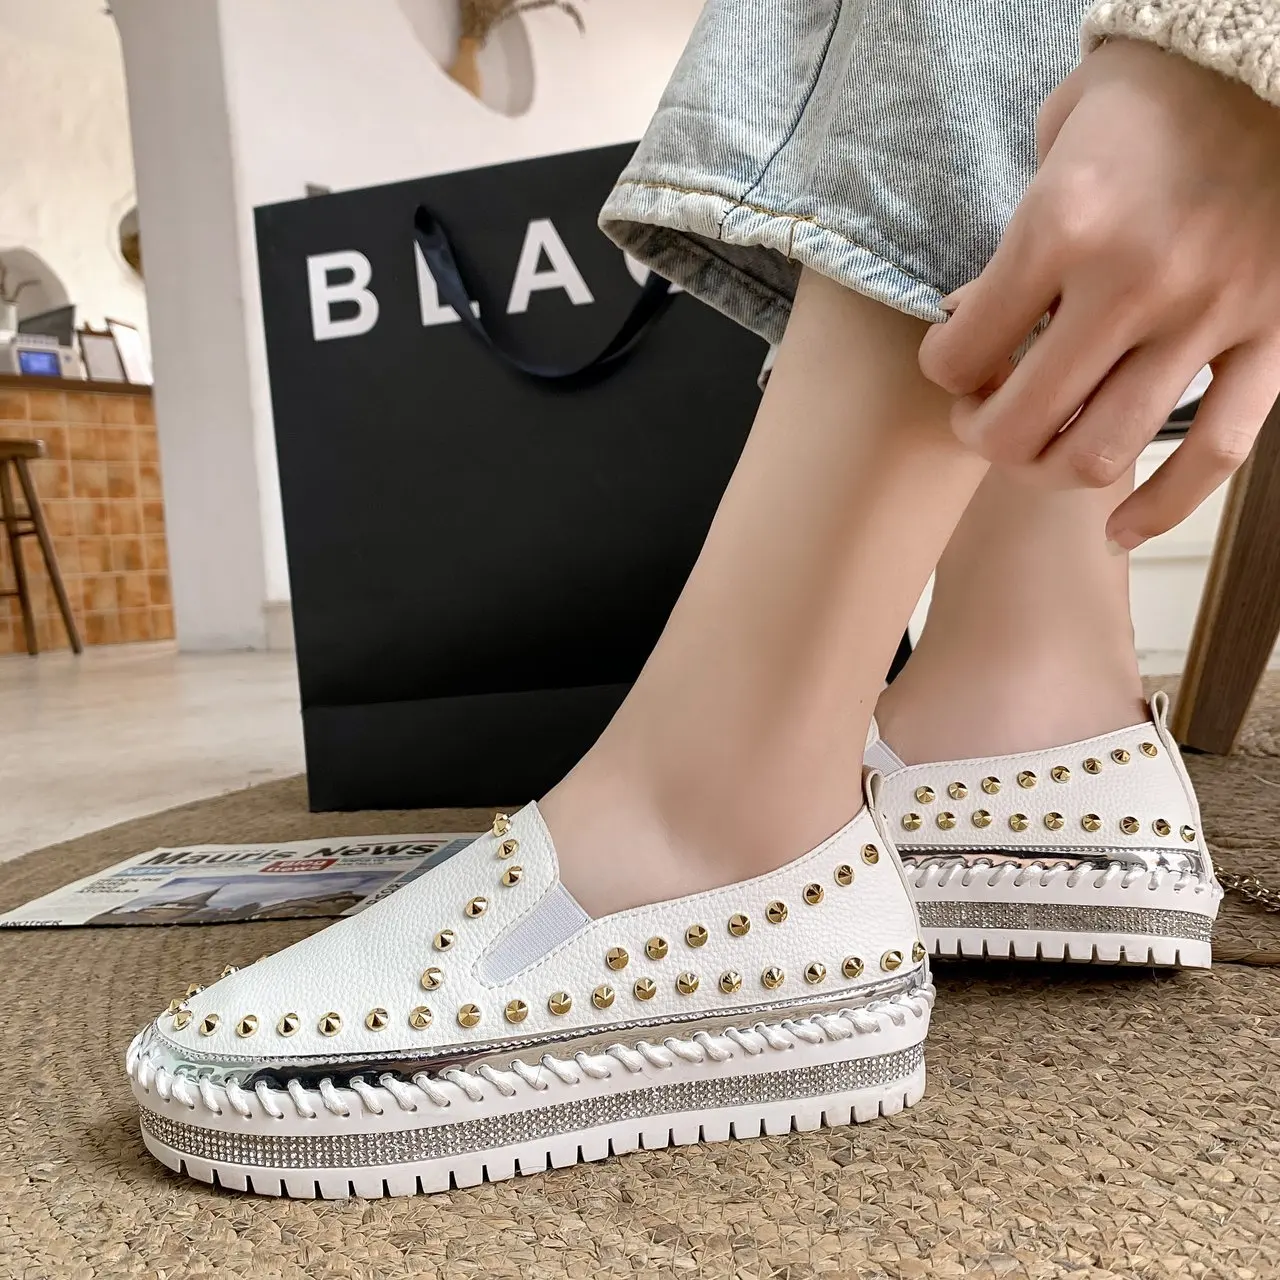 

Women Flat Shoes Casual Studded Flats Luxury Brand Rivet Loafers Platform Woman Shoes Slip on Big Size 41 42 43 Spikes Studded